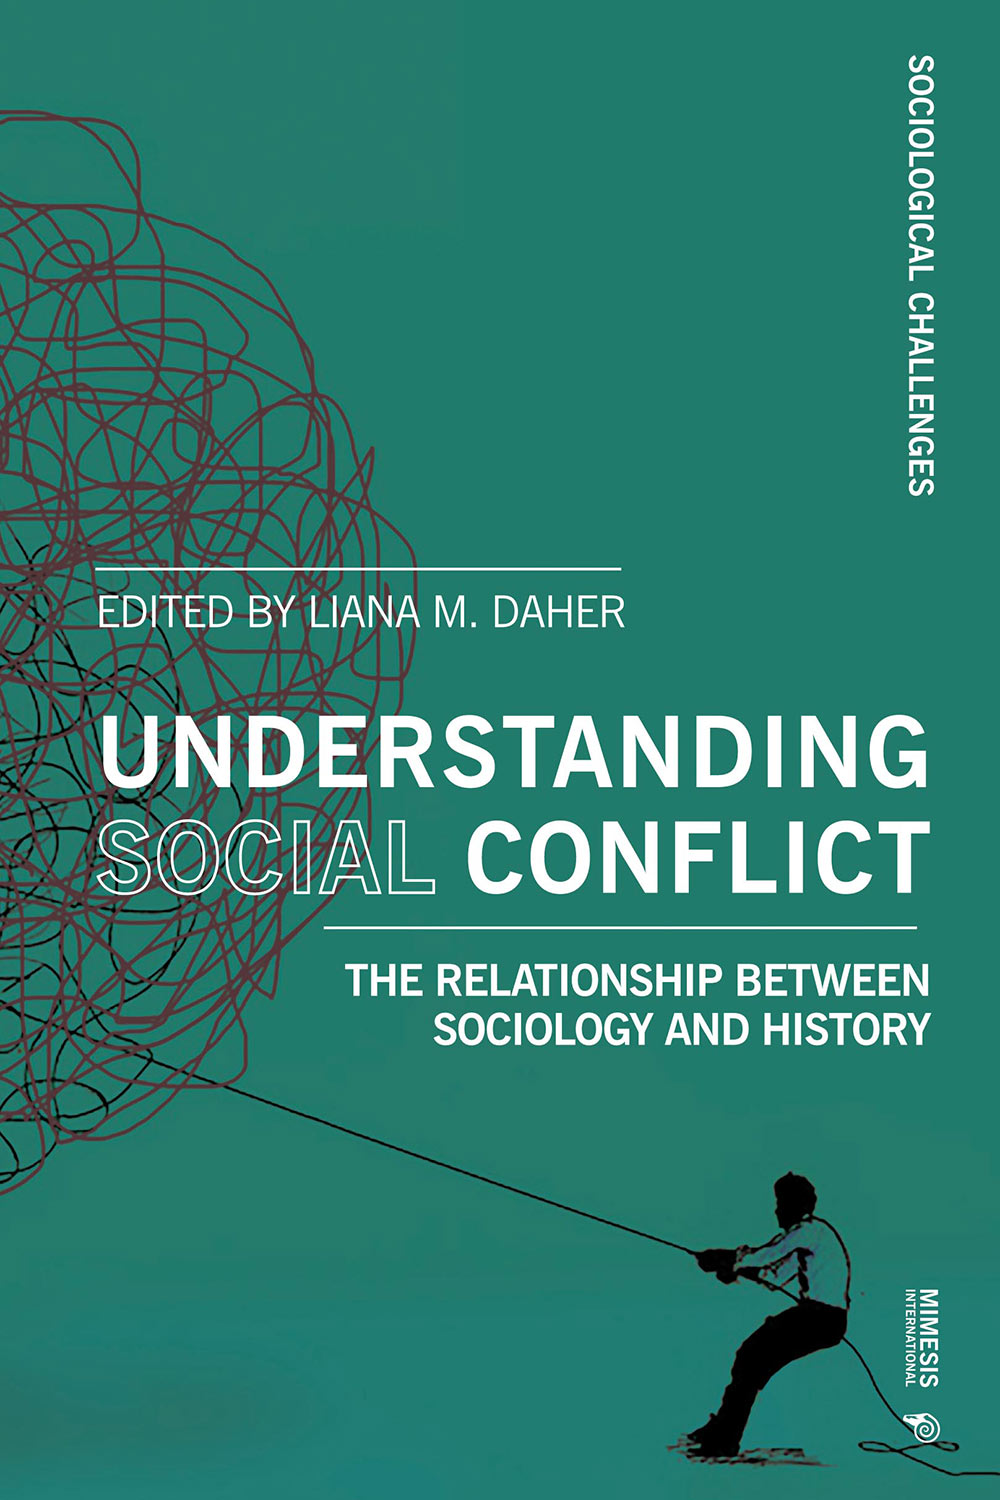 Understanding Social Conflict. The Relationship Between Sociology and History